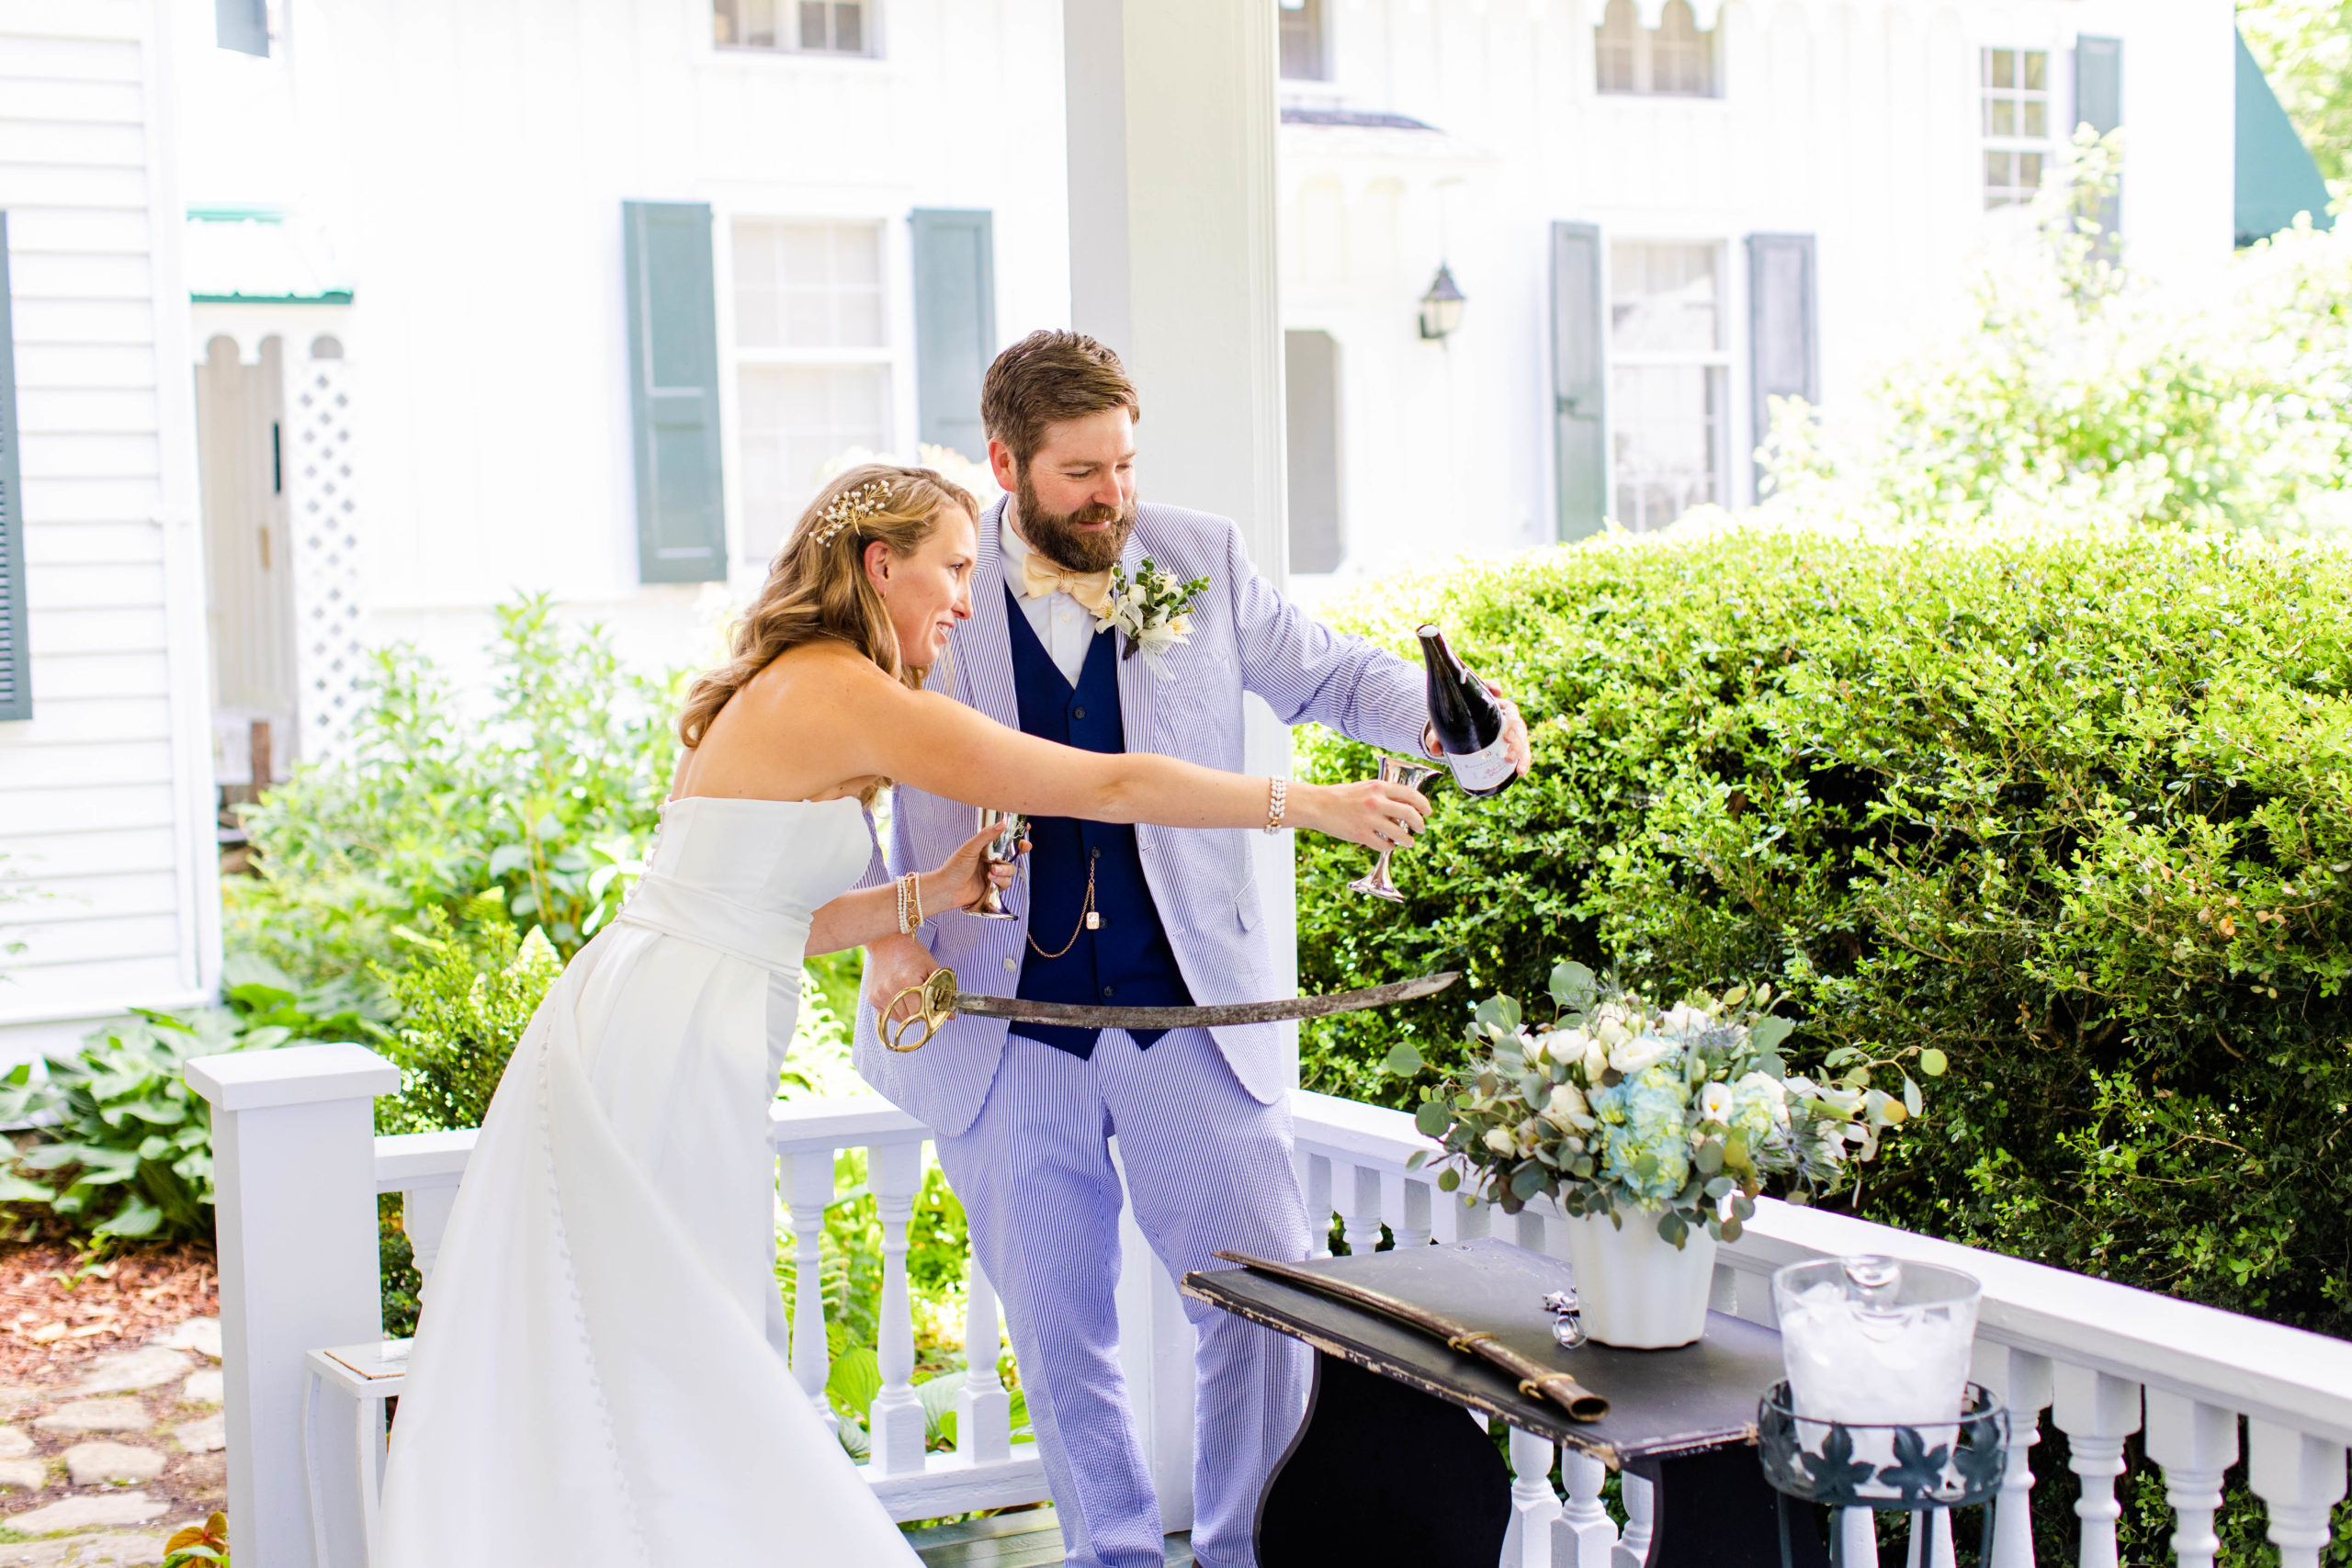 groom pours champagne for bride outside for their wedding